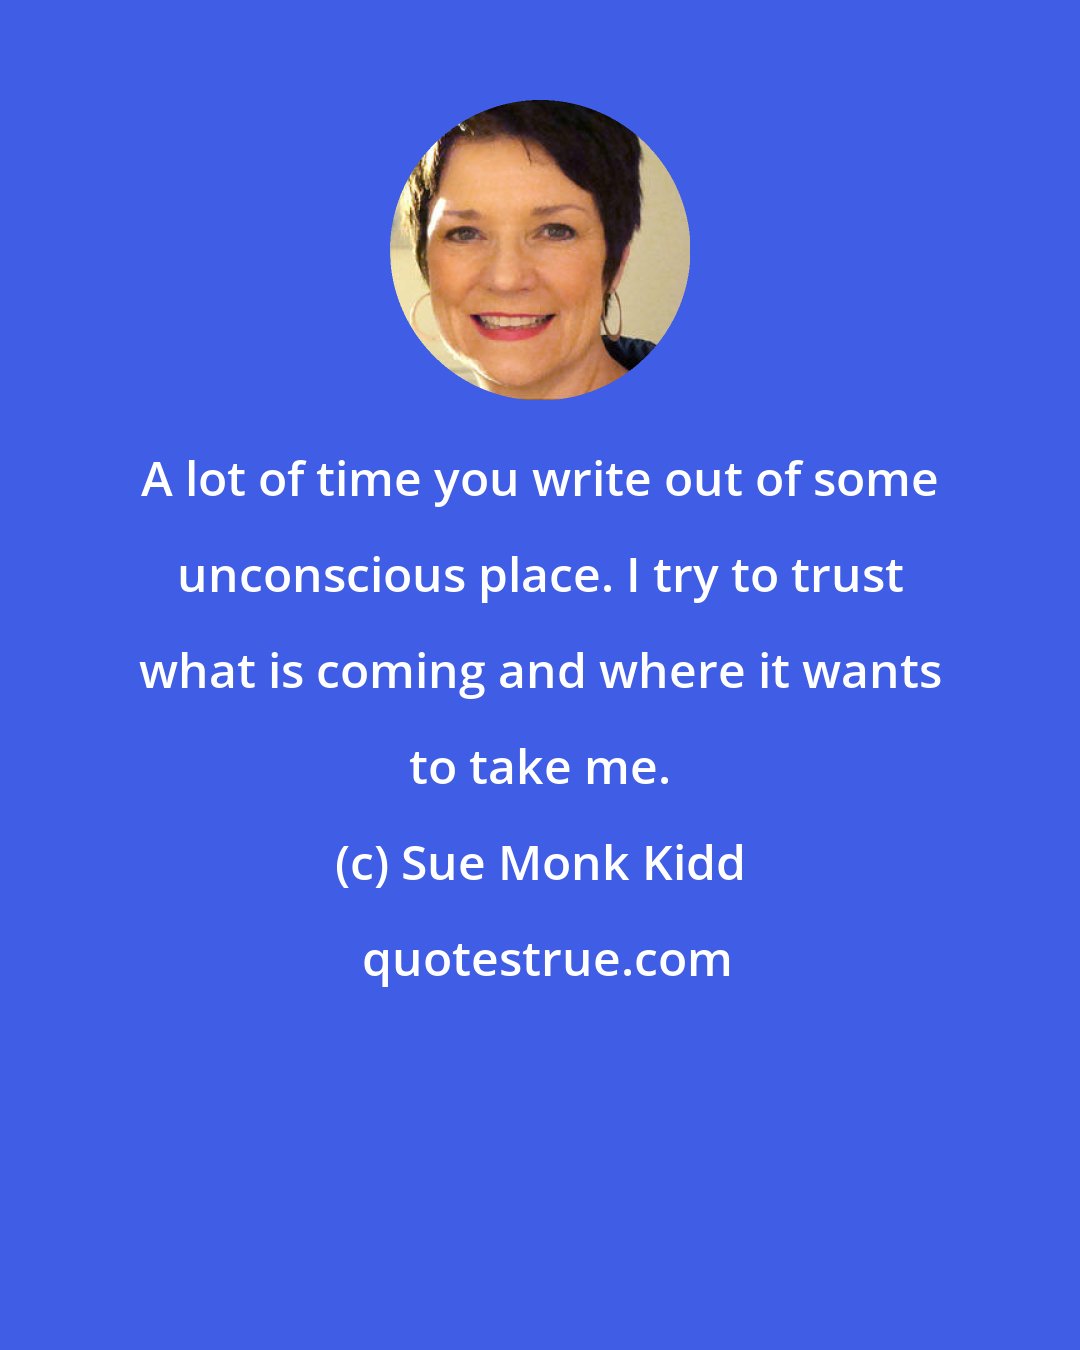 Sue Monk Kidd: A lot of time you write out of some unconscious place. I try to trust what is coming and where it wants to take me.